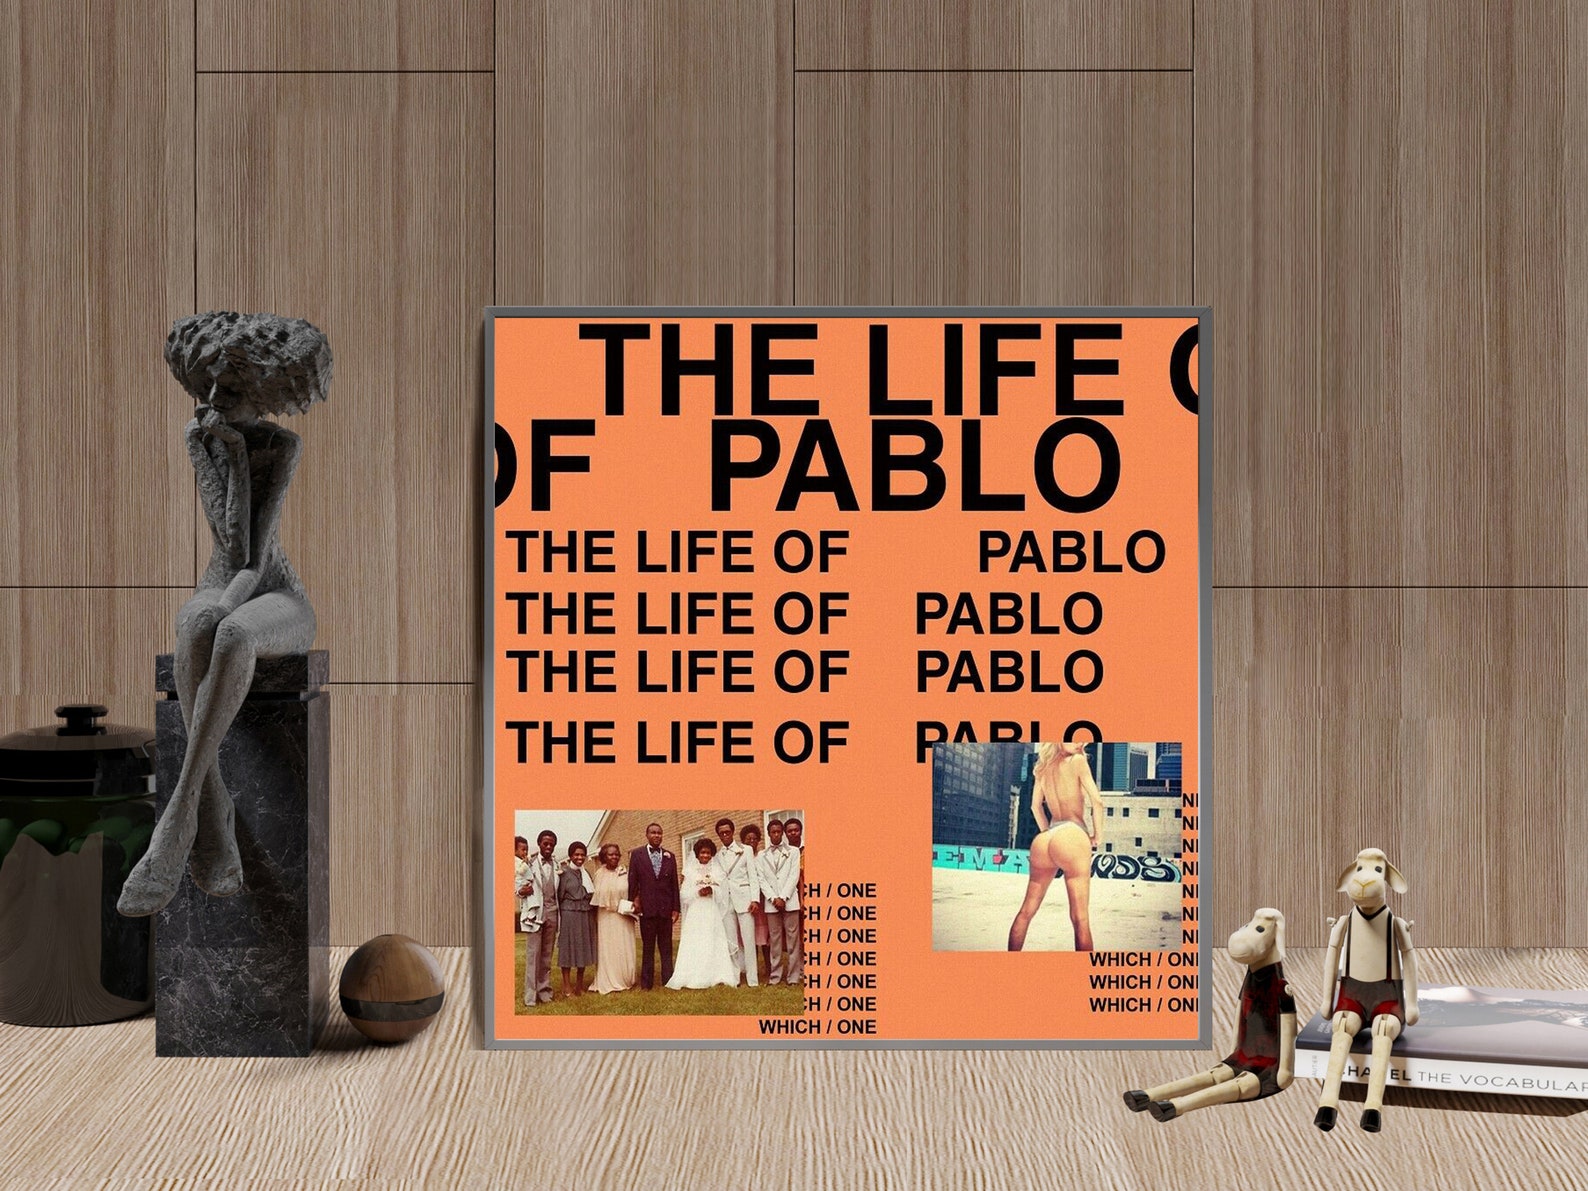 The life of pablo. Kanye West the Life of Pablo. Pablo Kanye West обложка. Kanye West Life of Pablo CD. The Life of Pablo Cover.